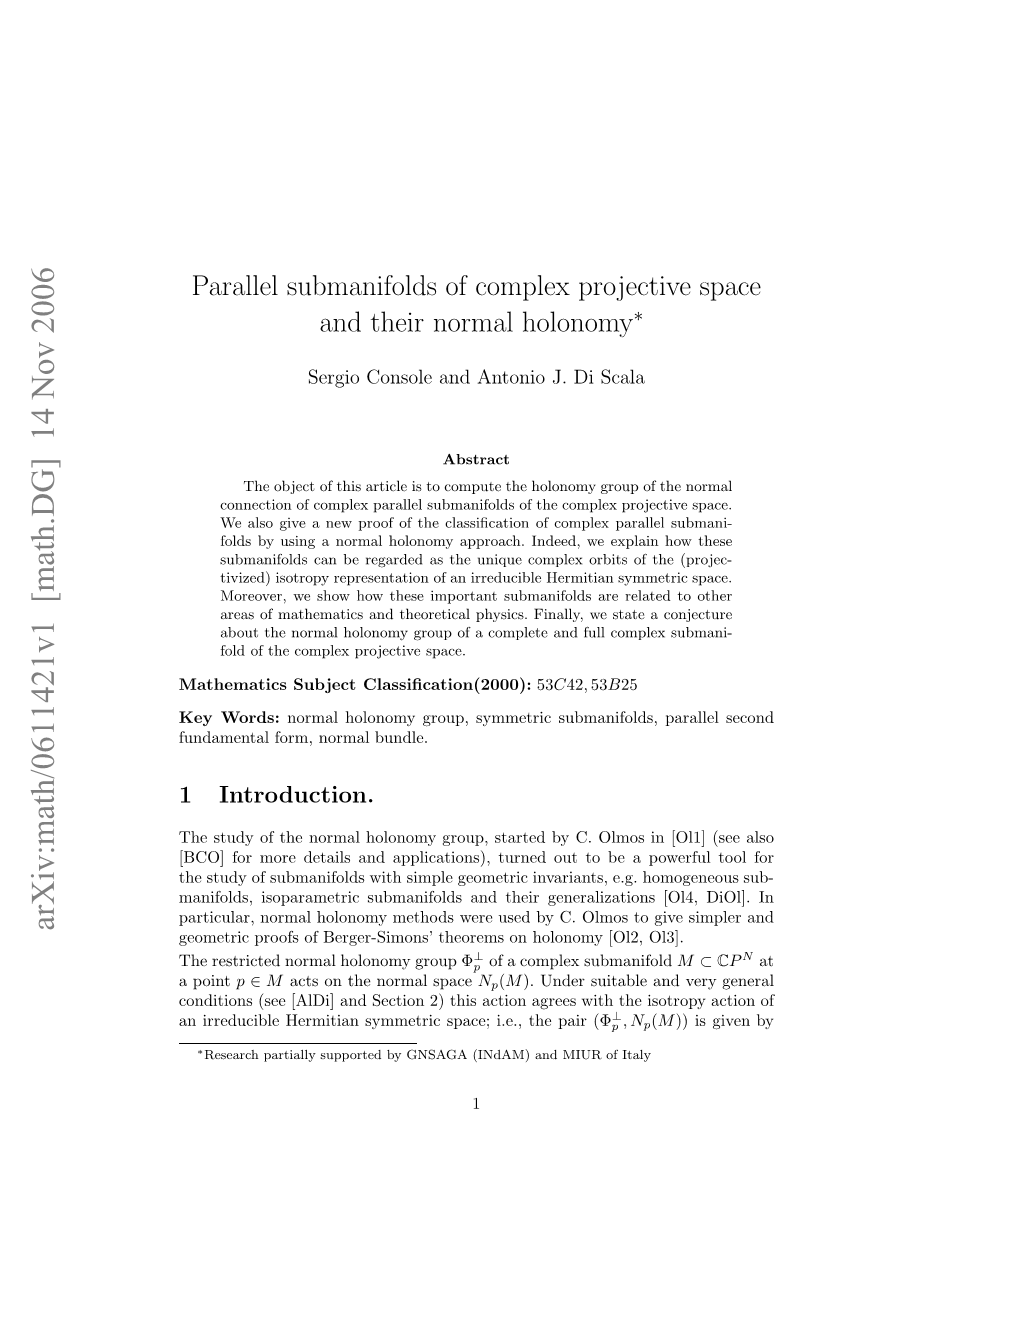 Parallel Submanifolds of Complex Projective Space and Their Normal